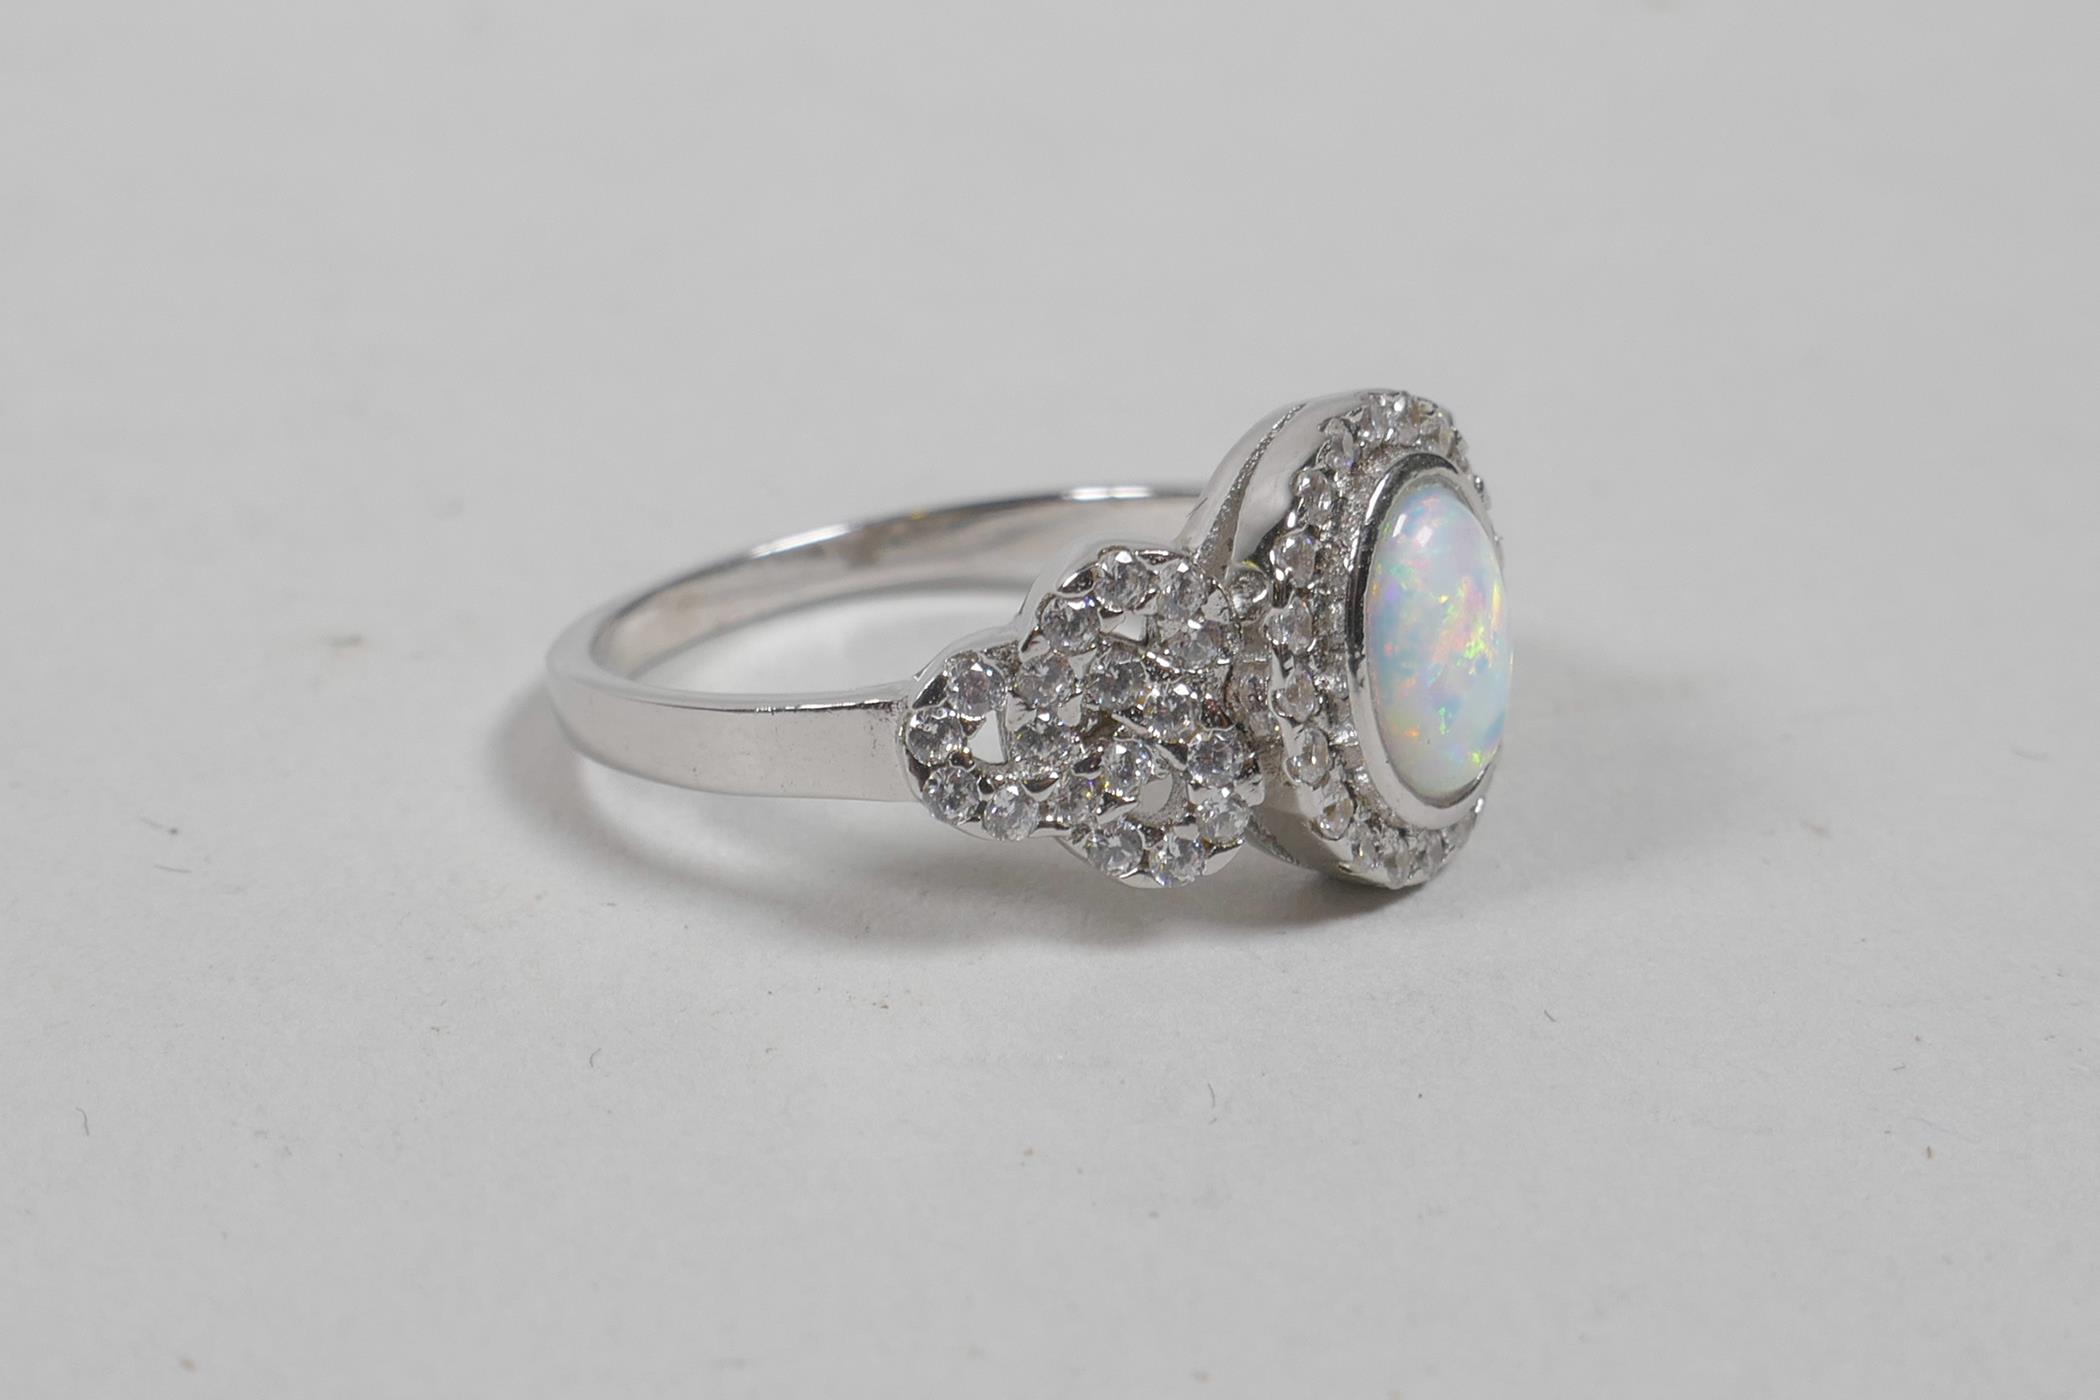 A silver, cubic zirconium and opalite panelled ring, approximate size 'P' - Image 2 of 2